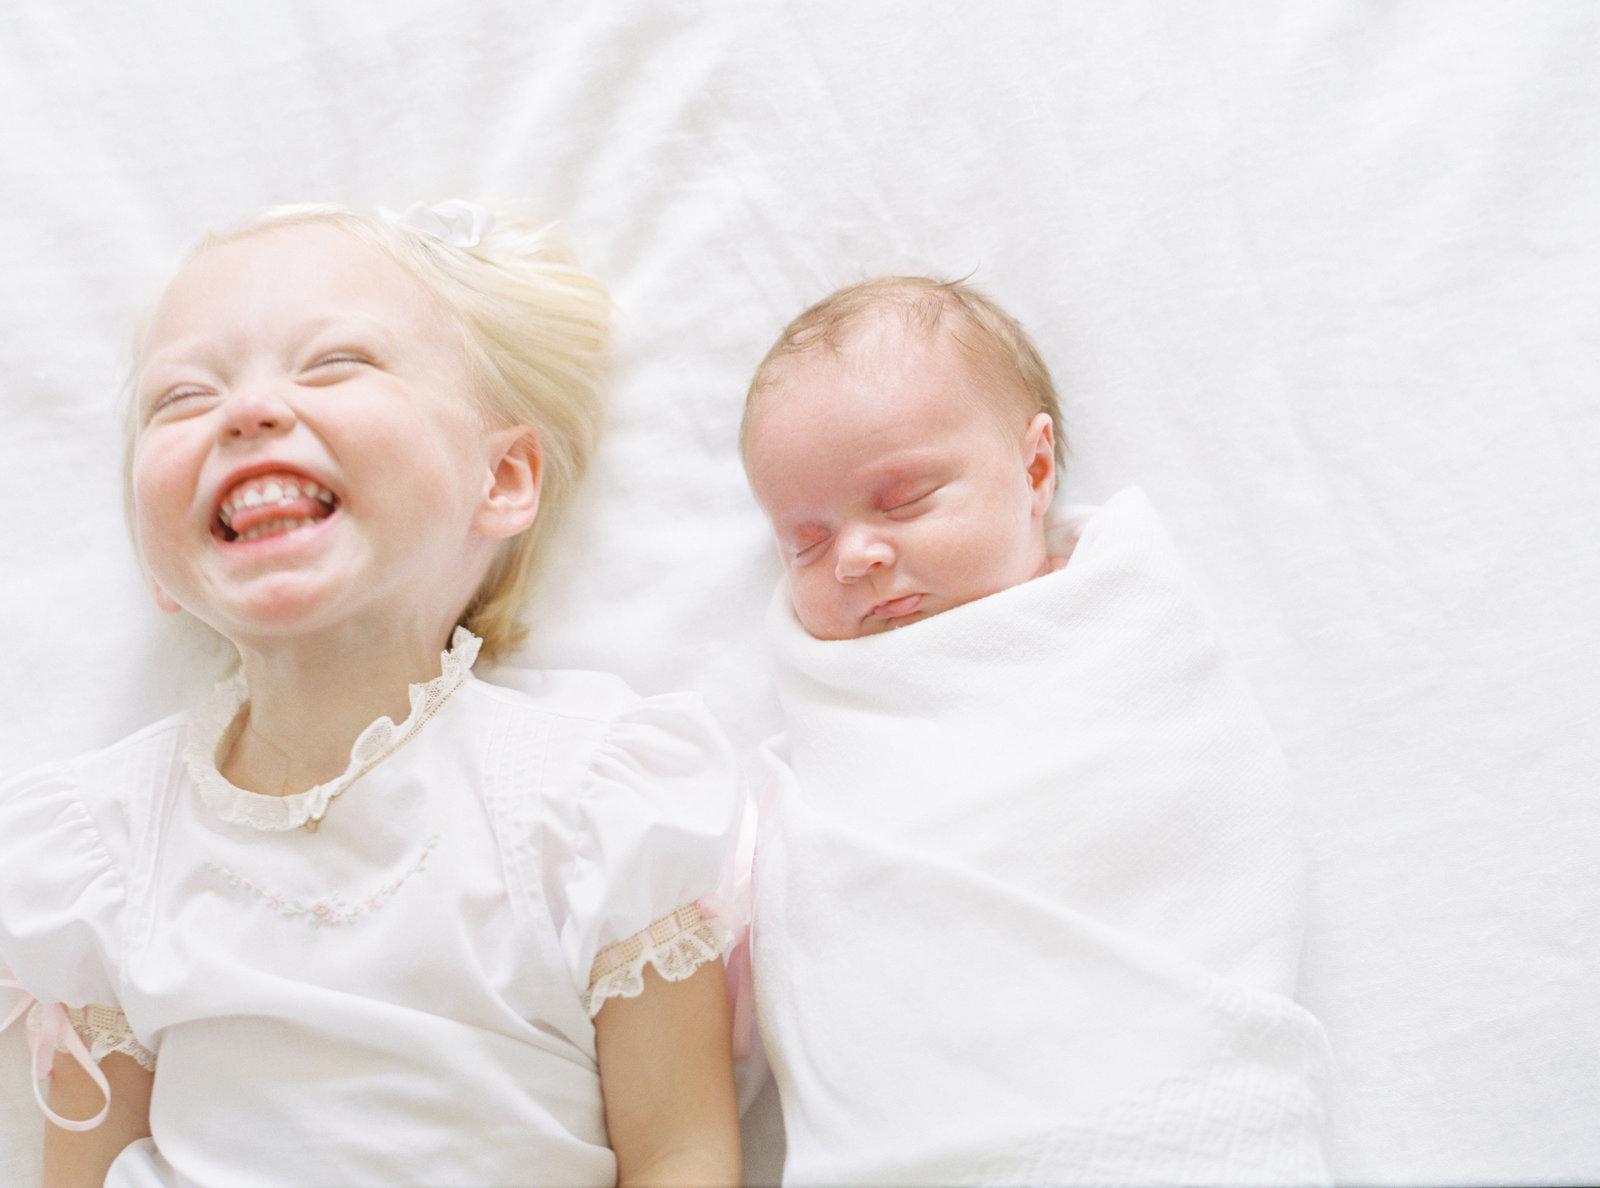 Photograph of a sleeping newborn next to a smiling sister, taken in Birmingham, AL by Alice Claire Photography